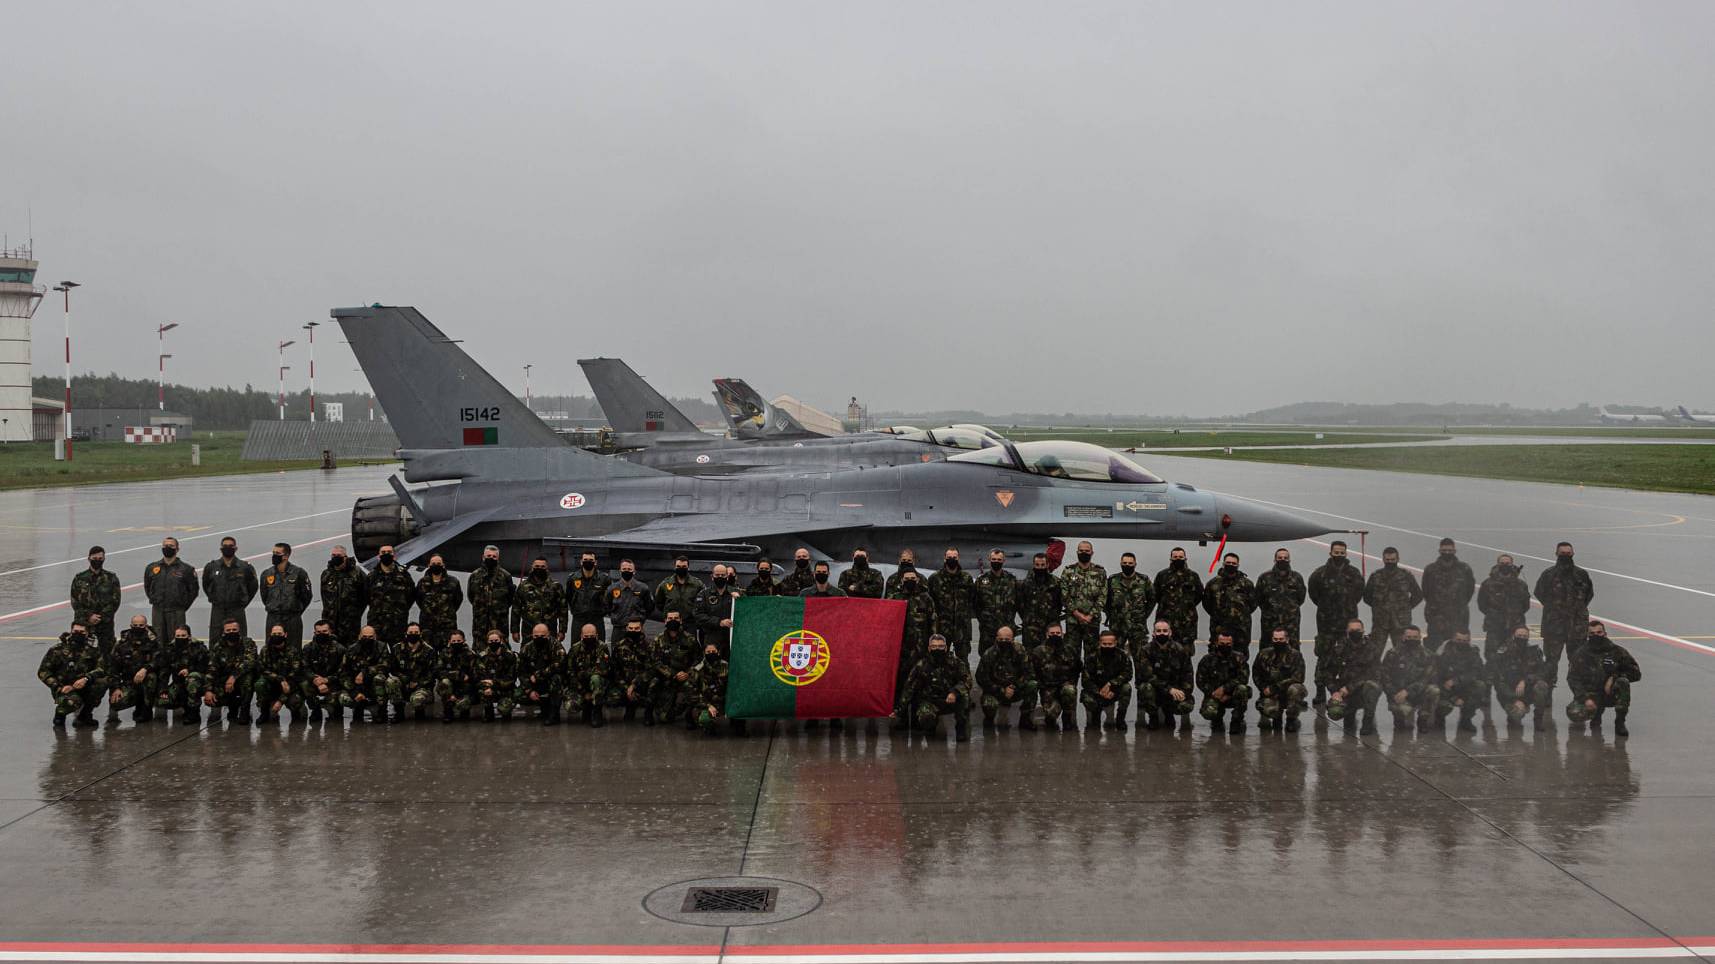 Portuguese Air Force begins NATO “Enhanced Air Policing” in Lithuania